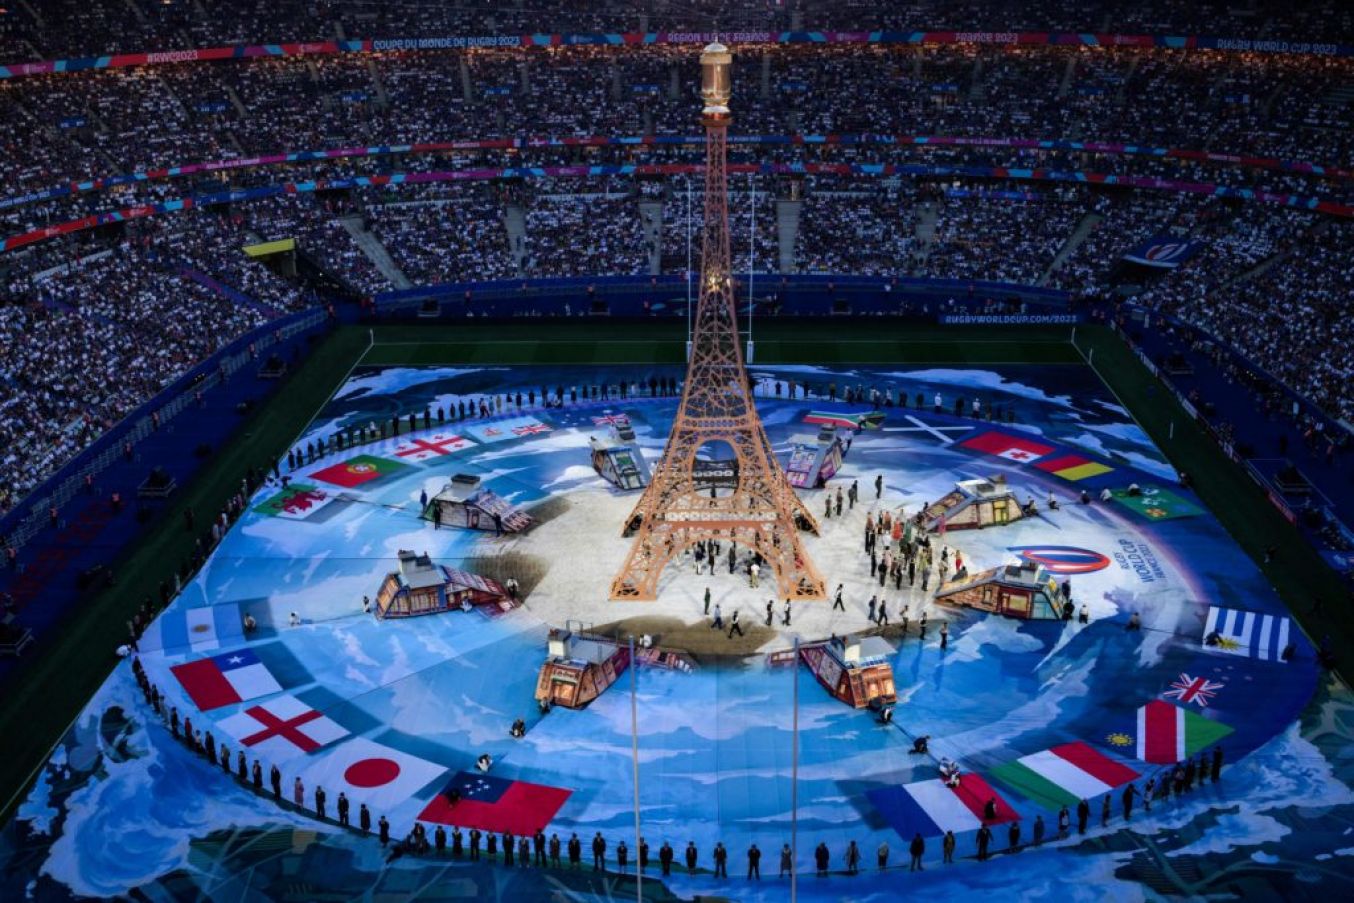 A Replica Of The Eiffel Tower During The Opening Ceremony. Photo: Getty